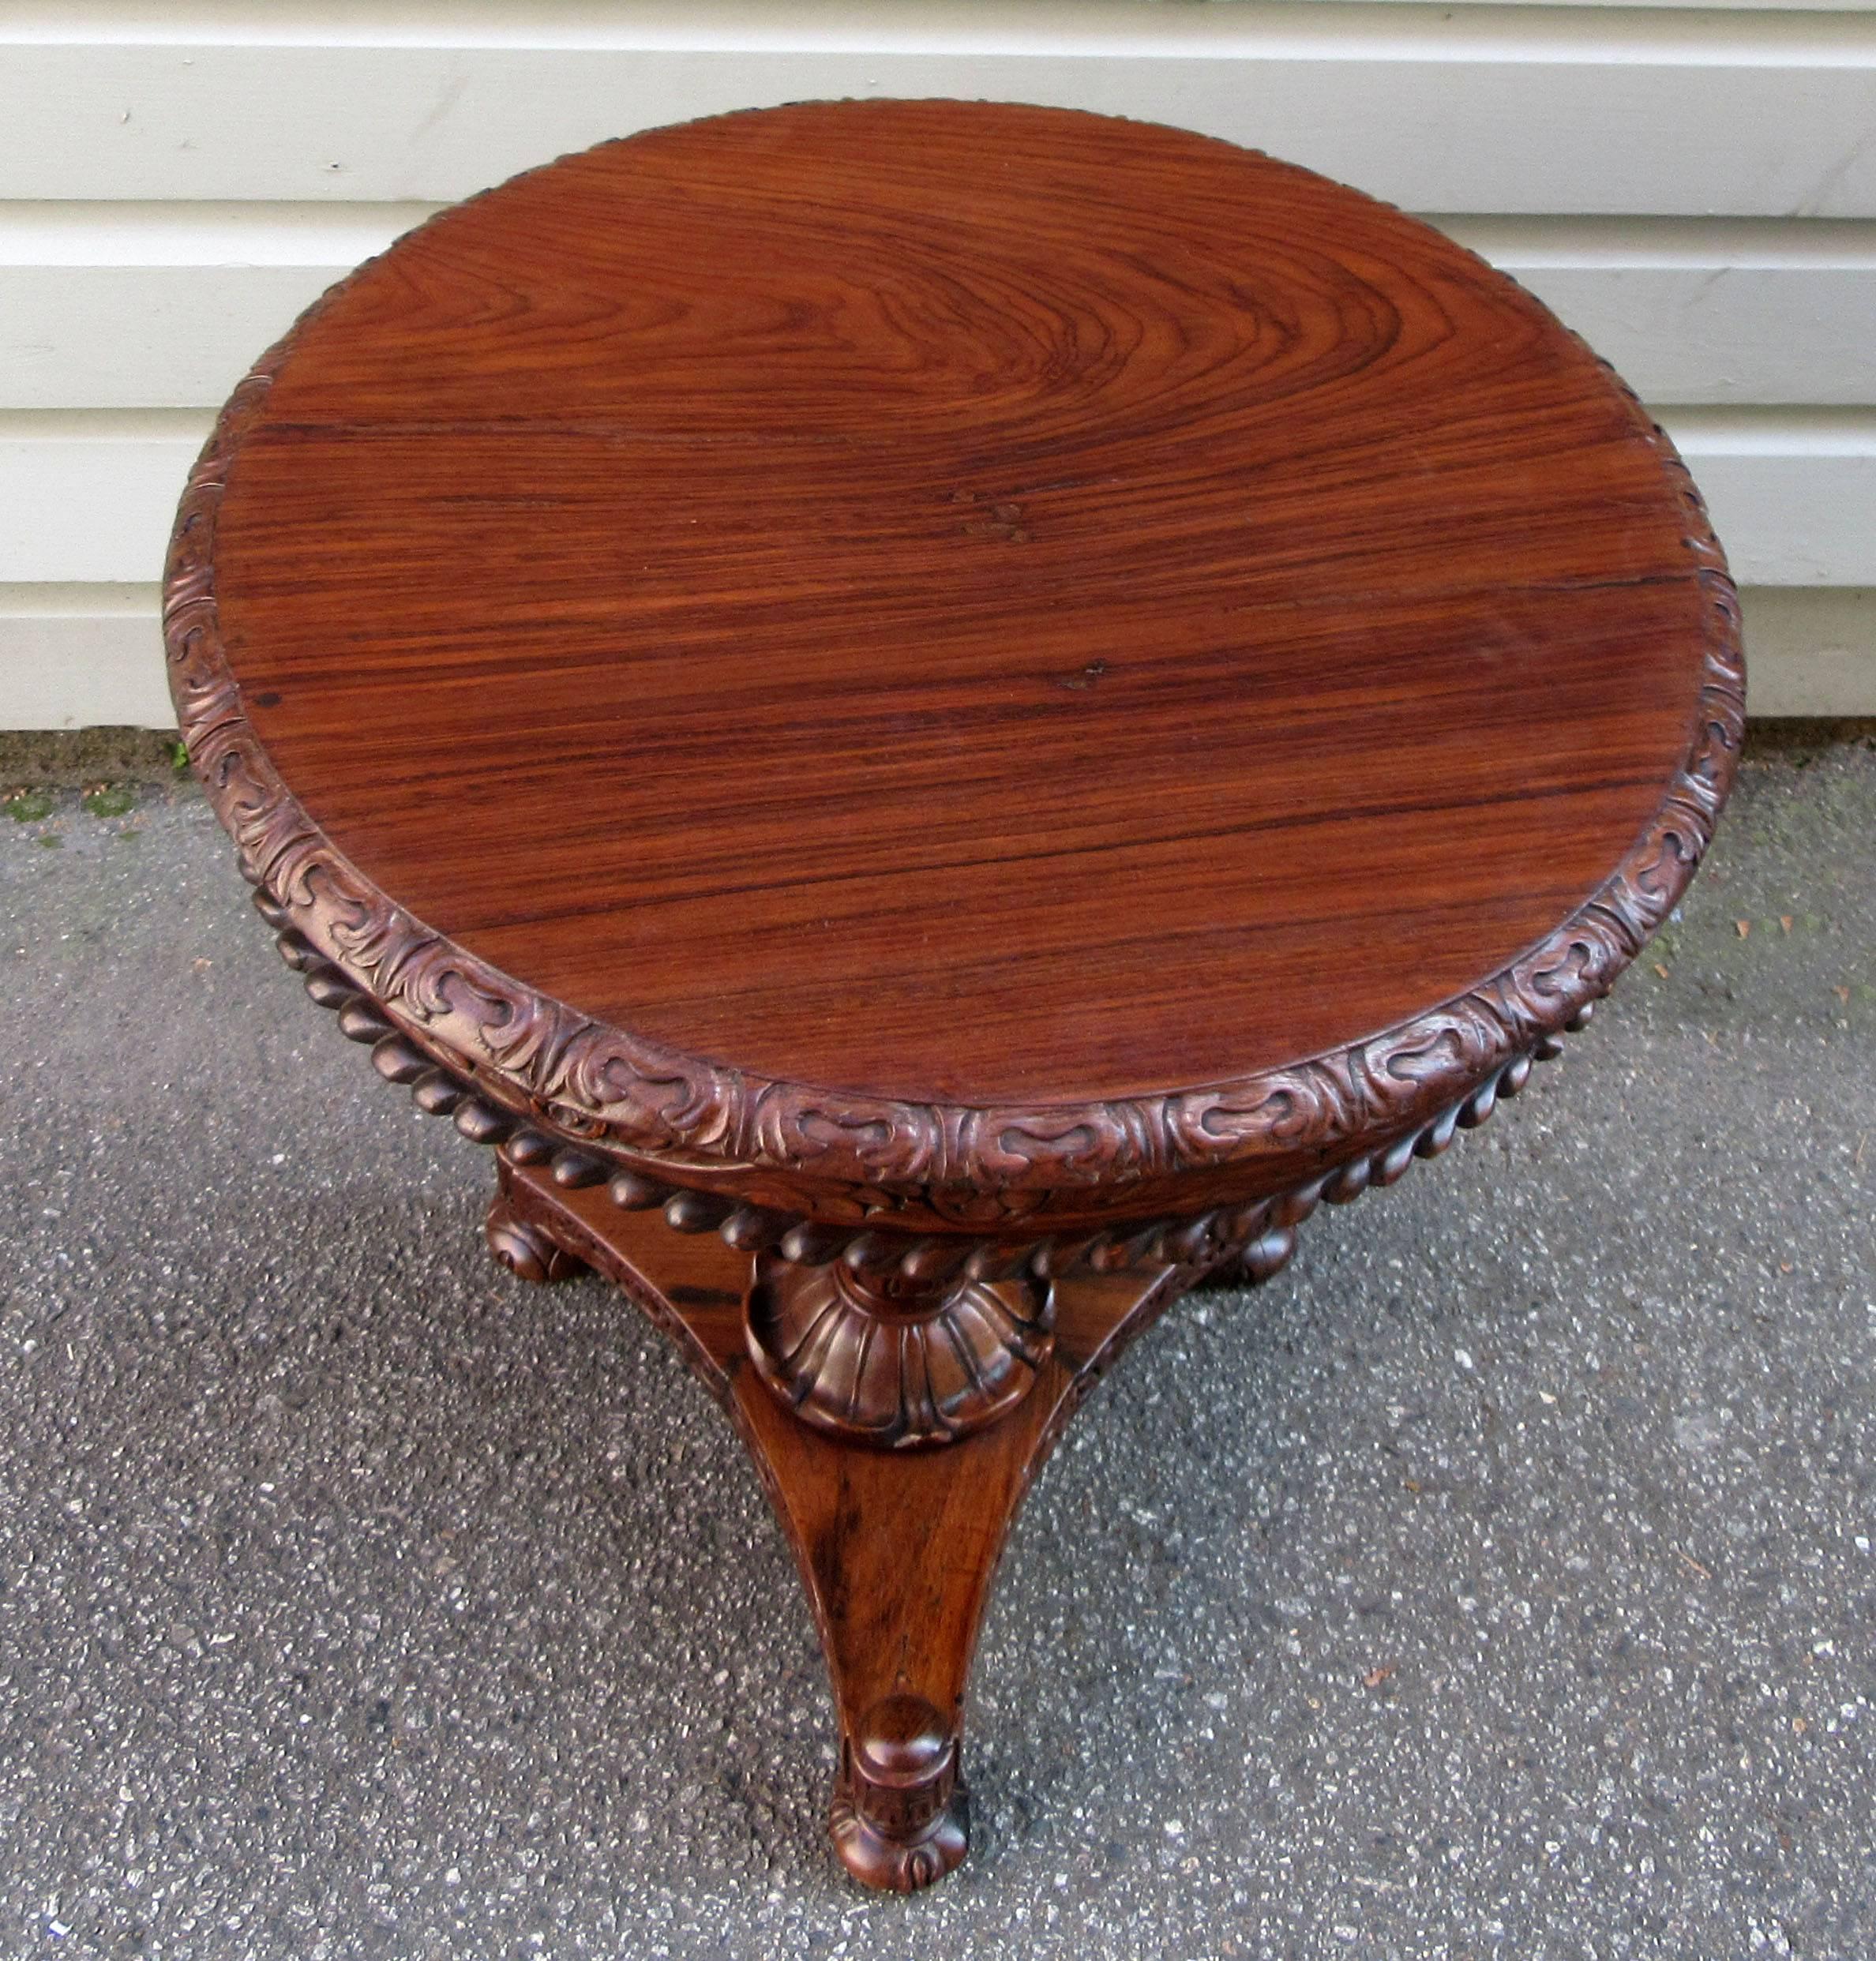 Hand-Carved 19th Century British Colonial Regency Rosewood Occasional Table